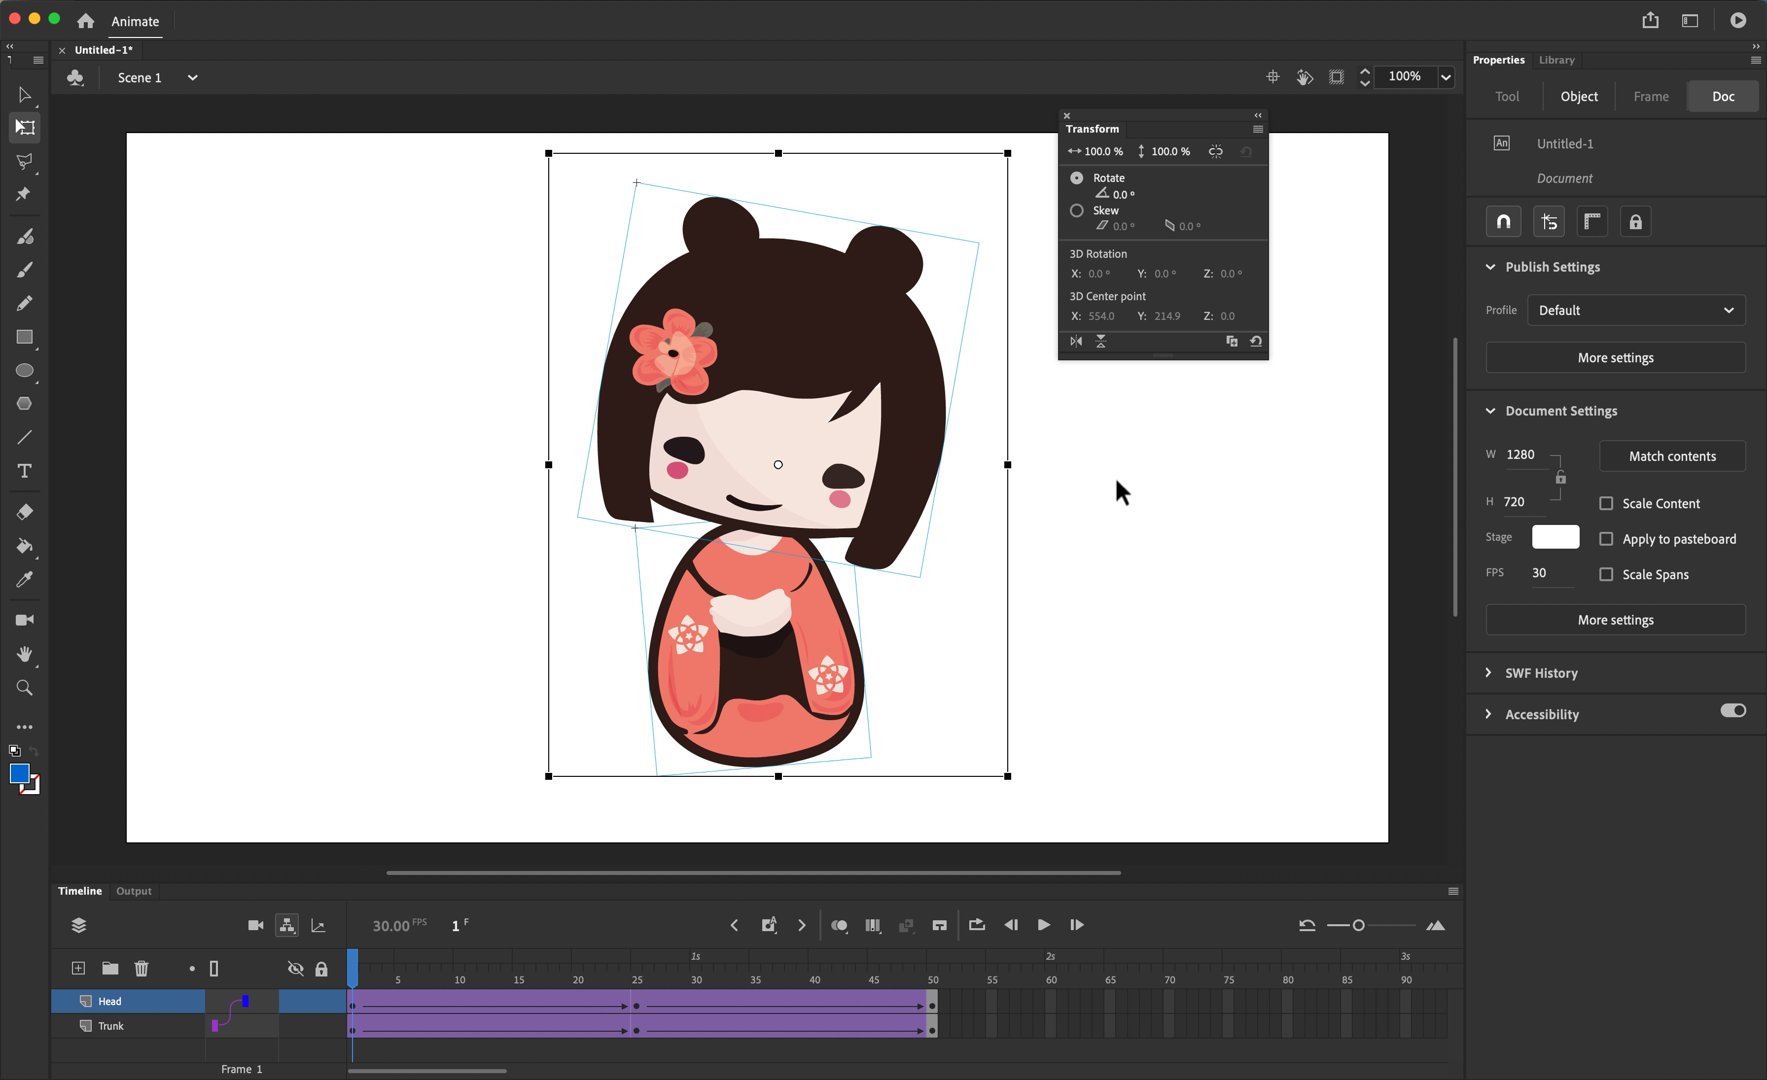 Adobe Animate animation software in action